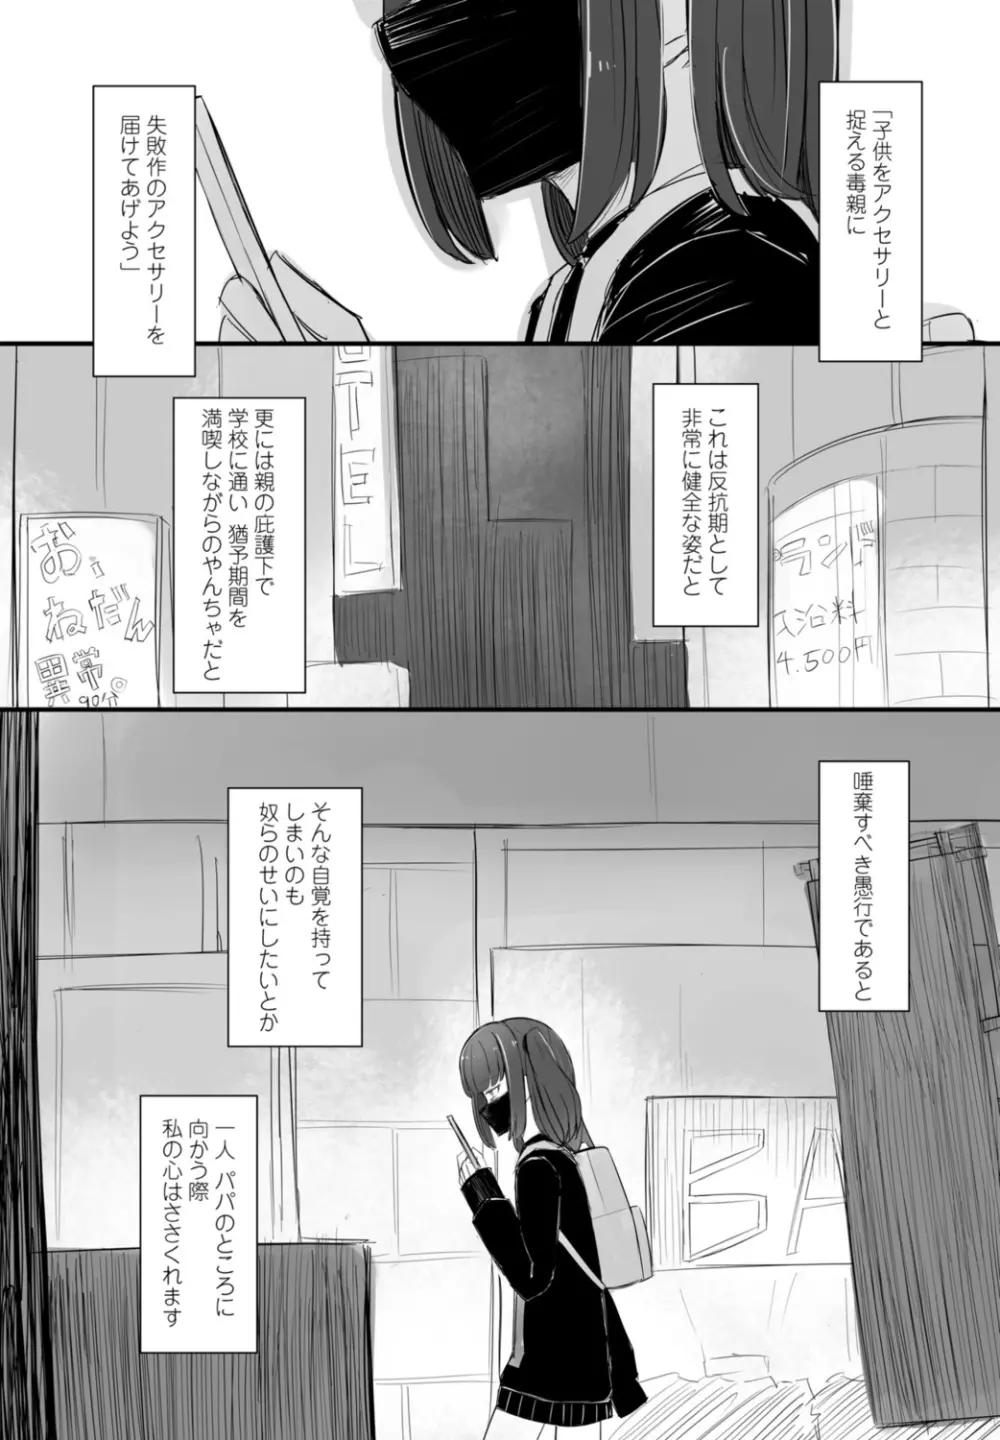 COMIC 桃姫DEEPEST Vol. 1 Page.292